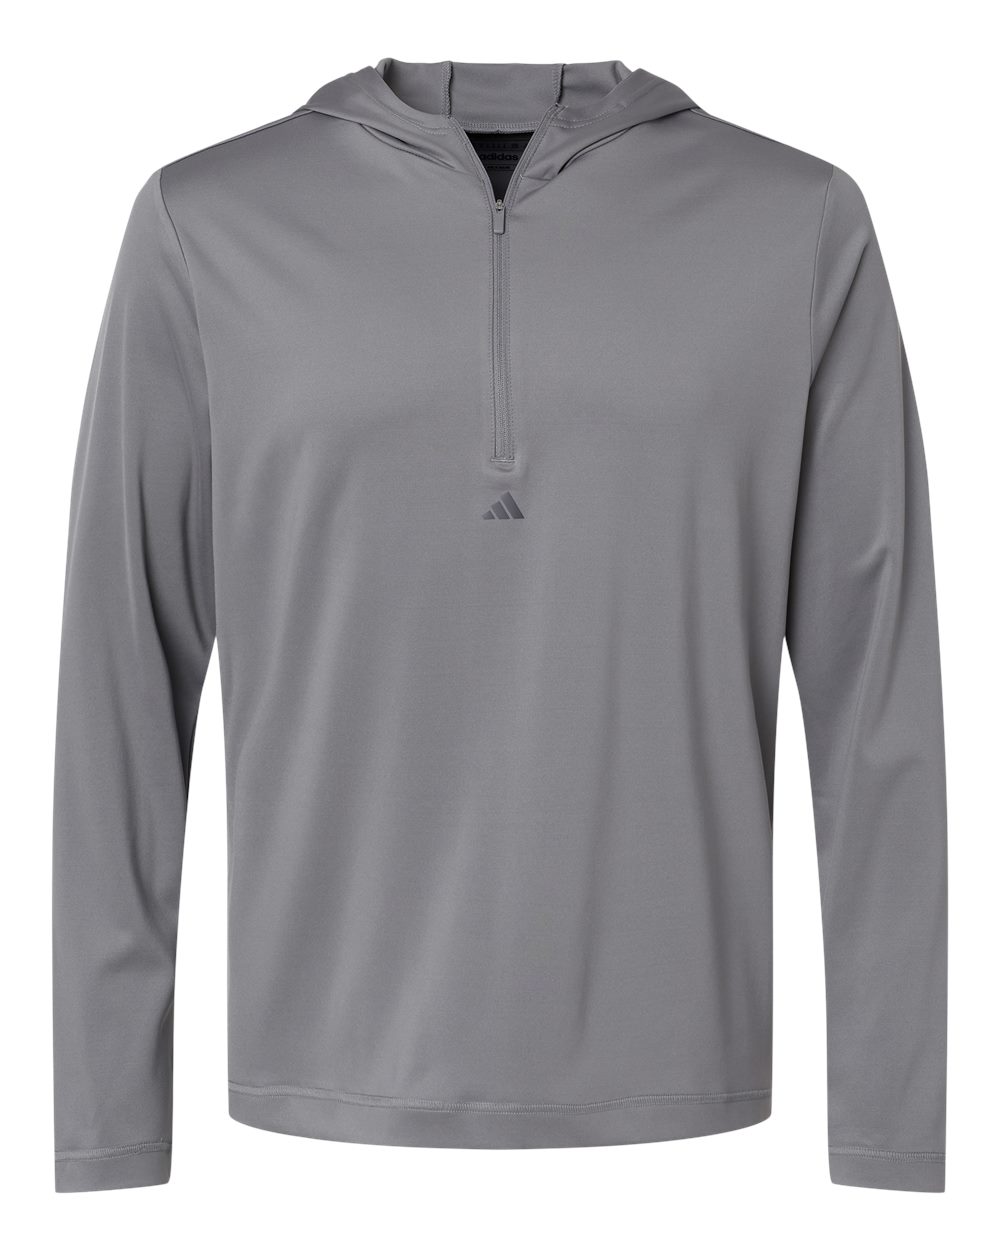 Adidas A596 Lightweight Performance Quarter-Zip Hooded Pullover #color_Grey Three